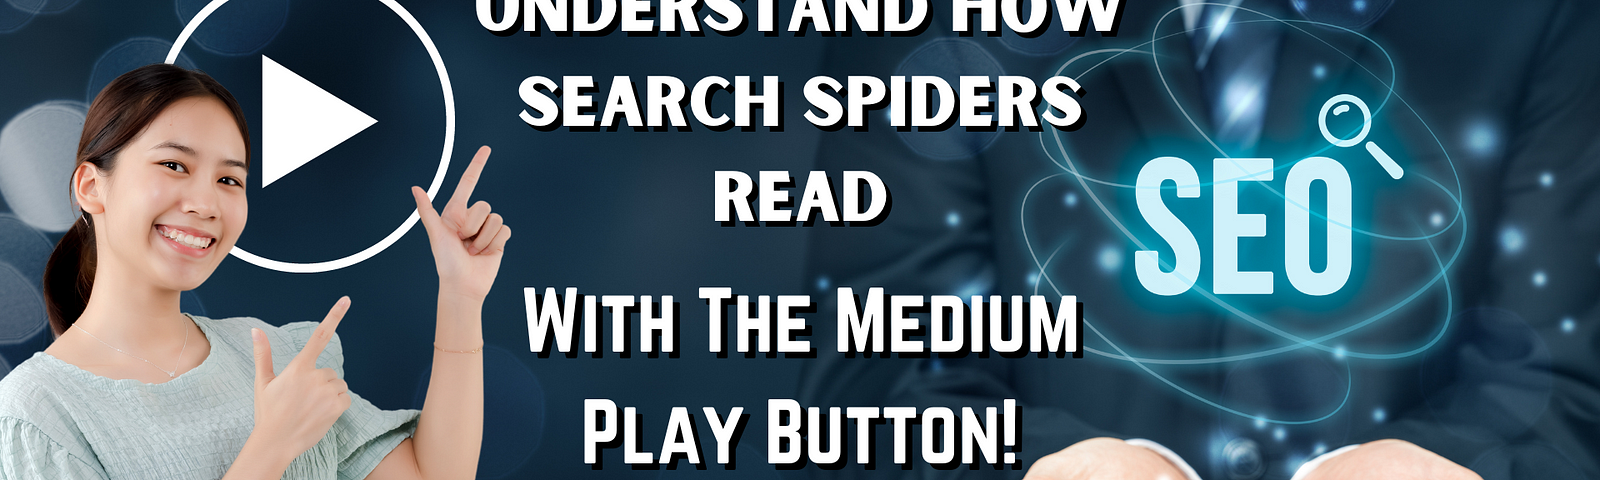 Use The Medium Play Button To Understand How SEO Search Spiders Read Pages